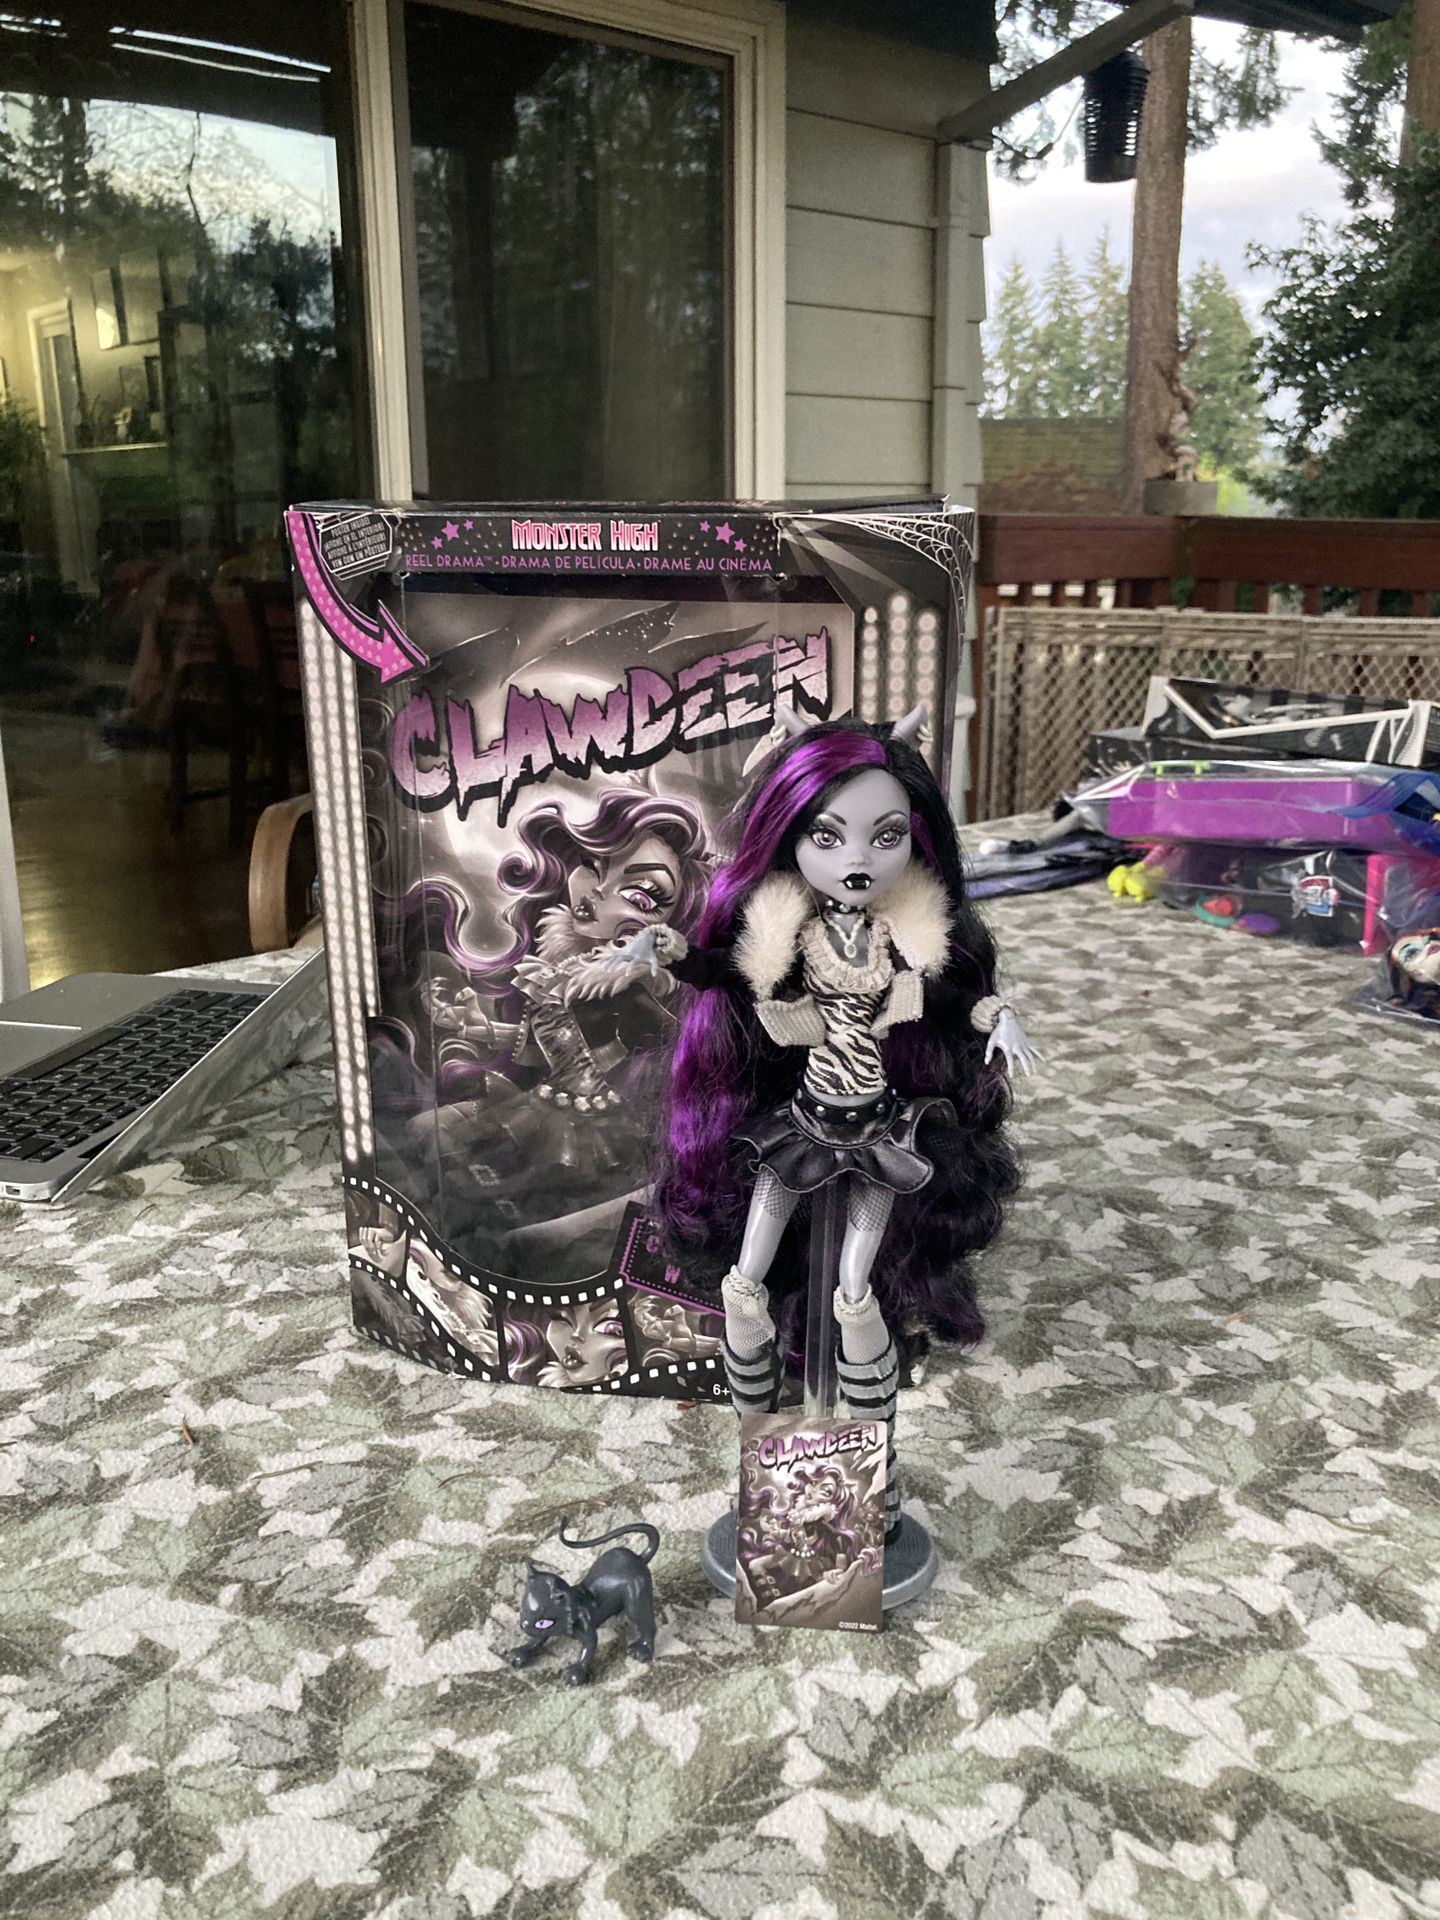 Complete Reel Drama Clawdeen Wolf Doll for Sale in Clackamas, OR